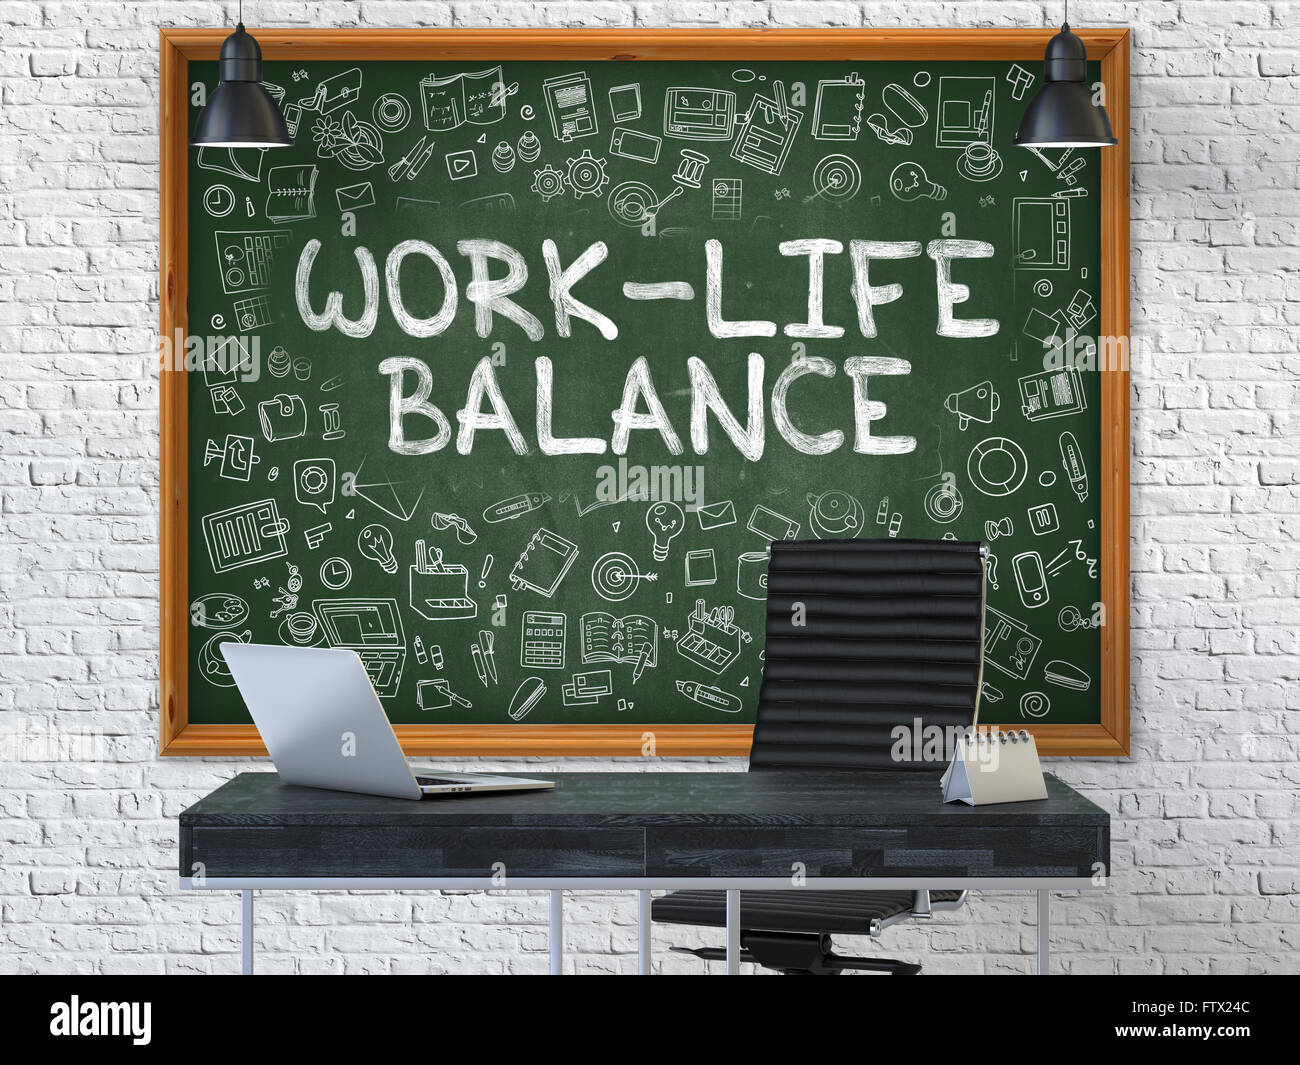 Work-Life Balance on Chalkboard in the Office. Stock Photo